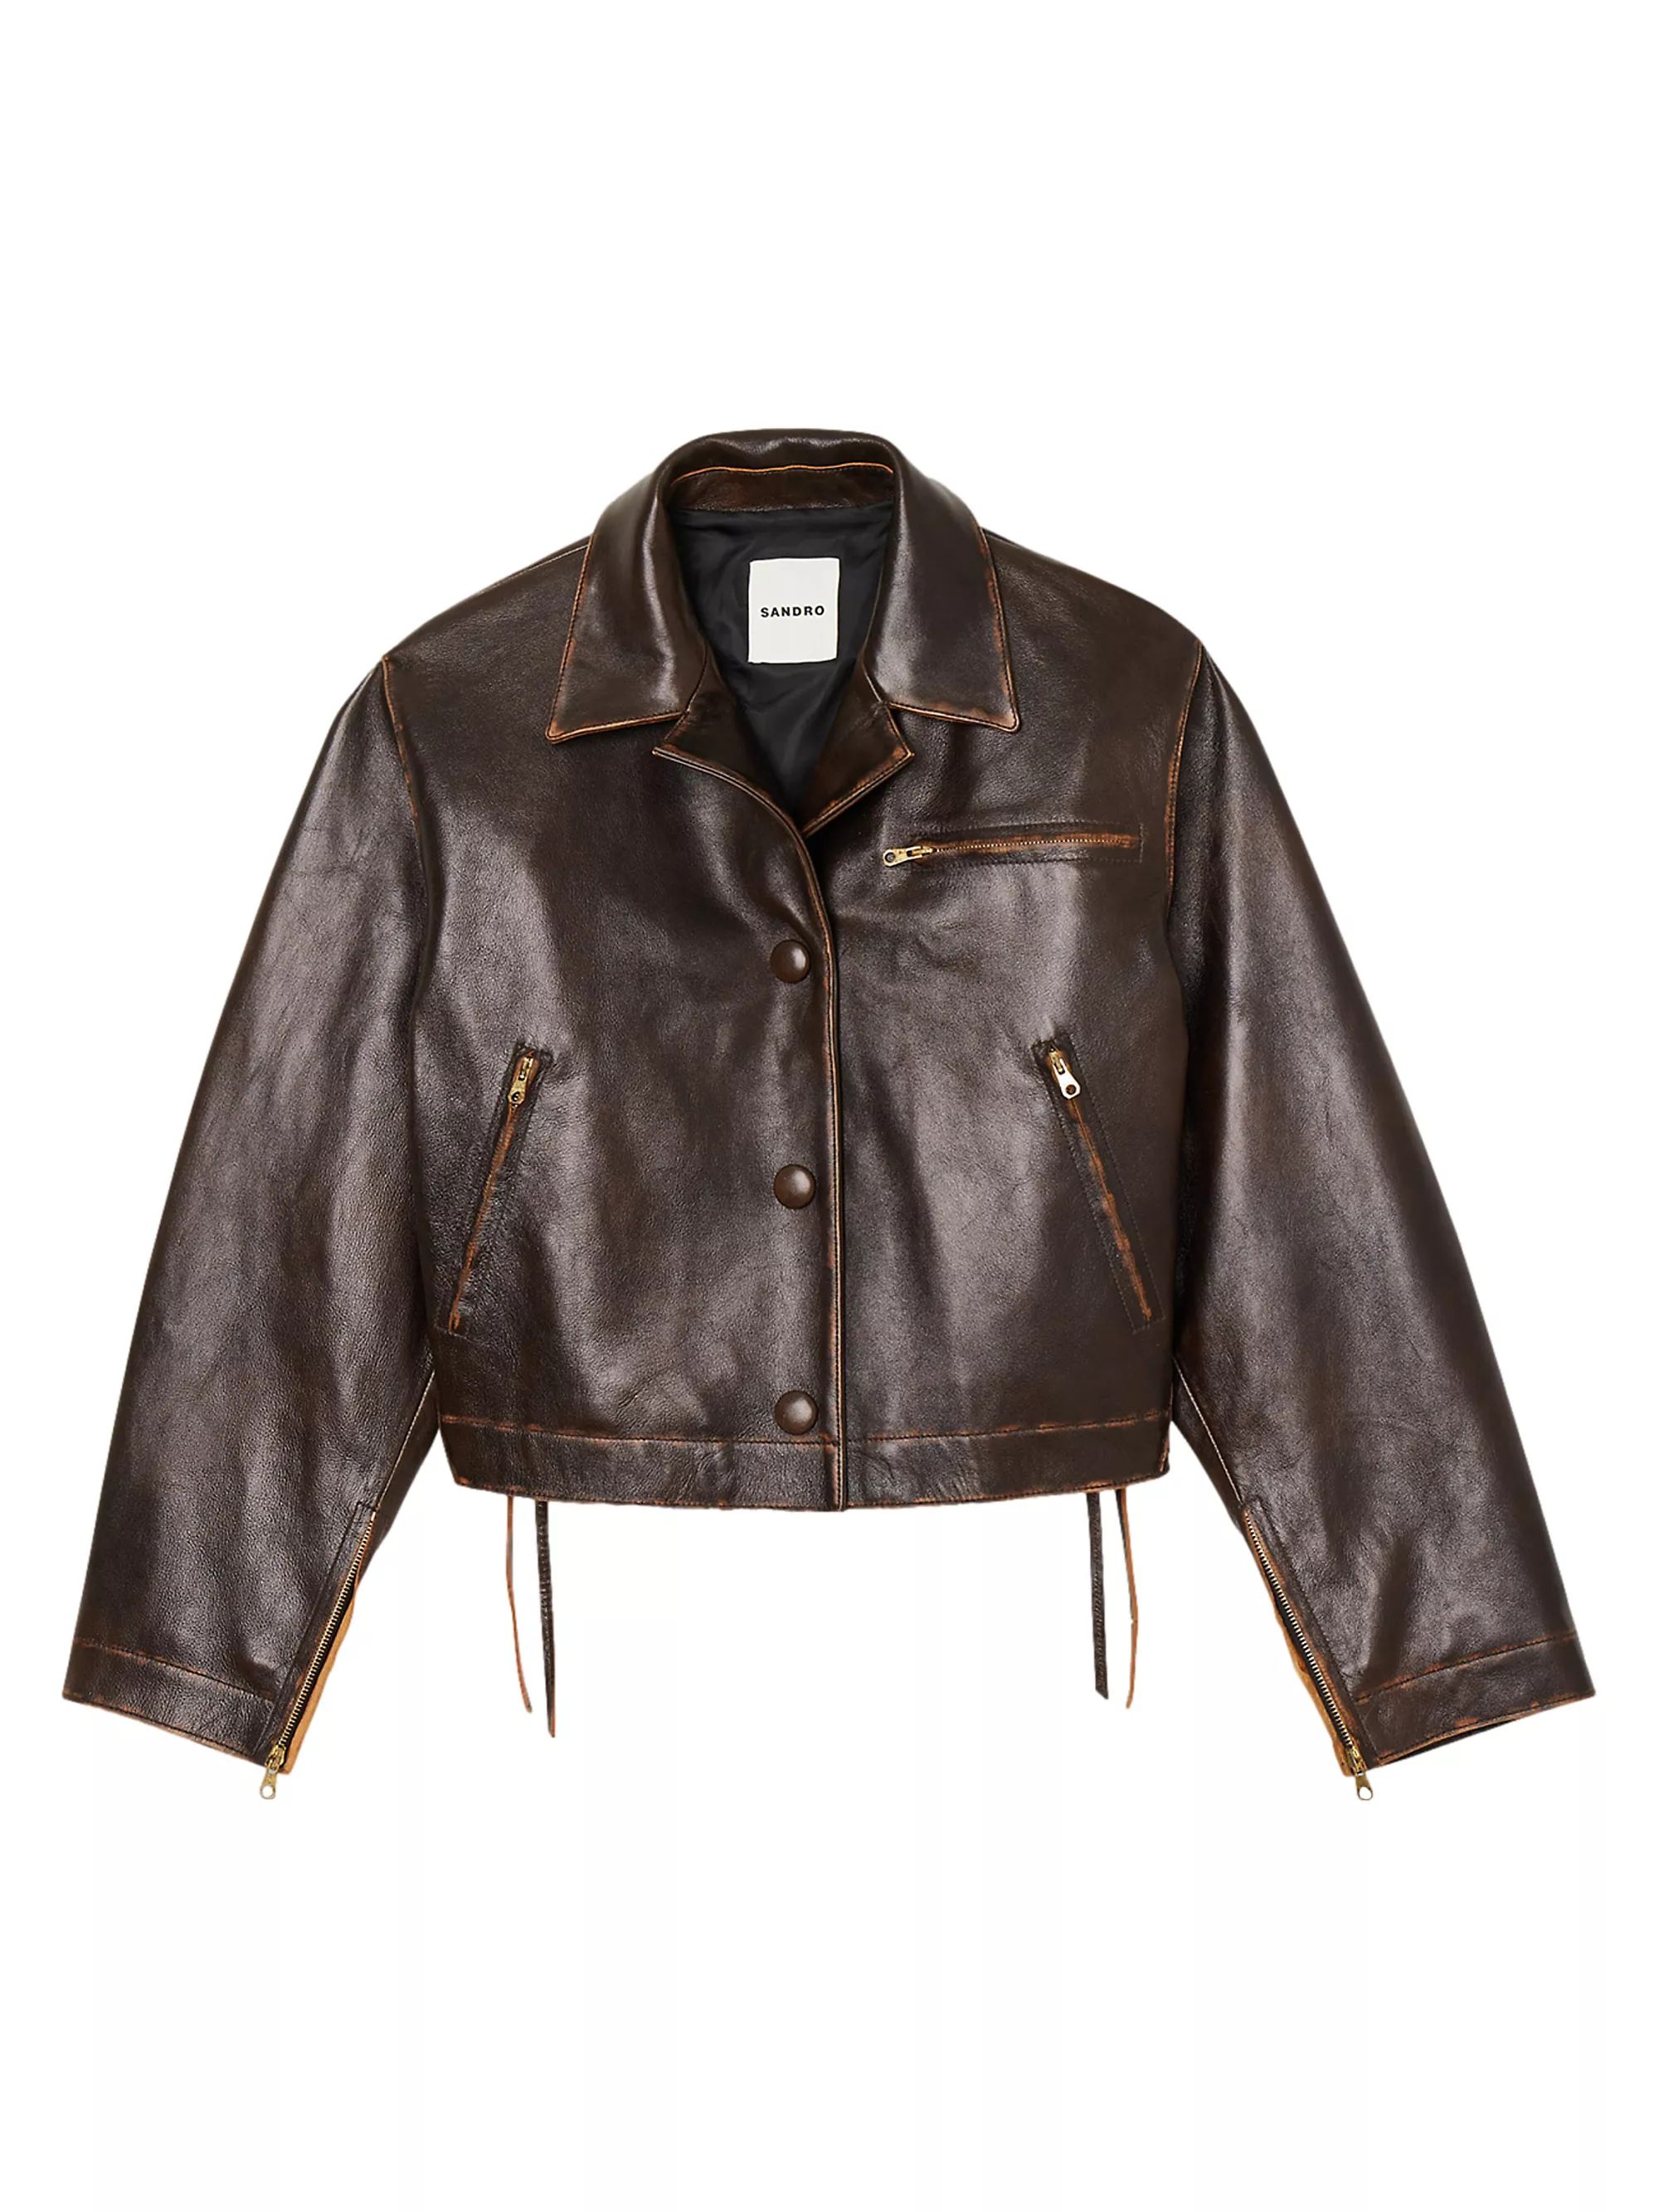 Shop Sandro Distressed Cropped Leather Jacket | Saks Fifth Avenue | Saks Fifth Avenue